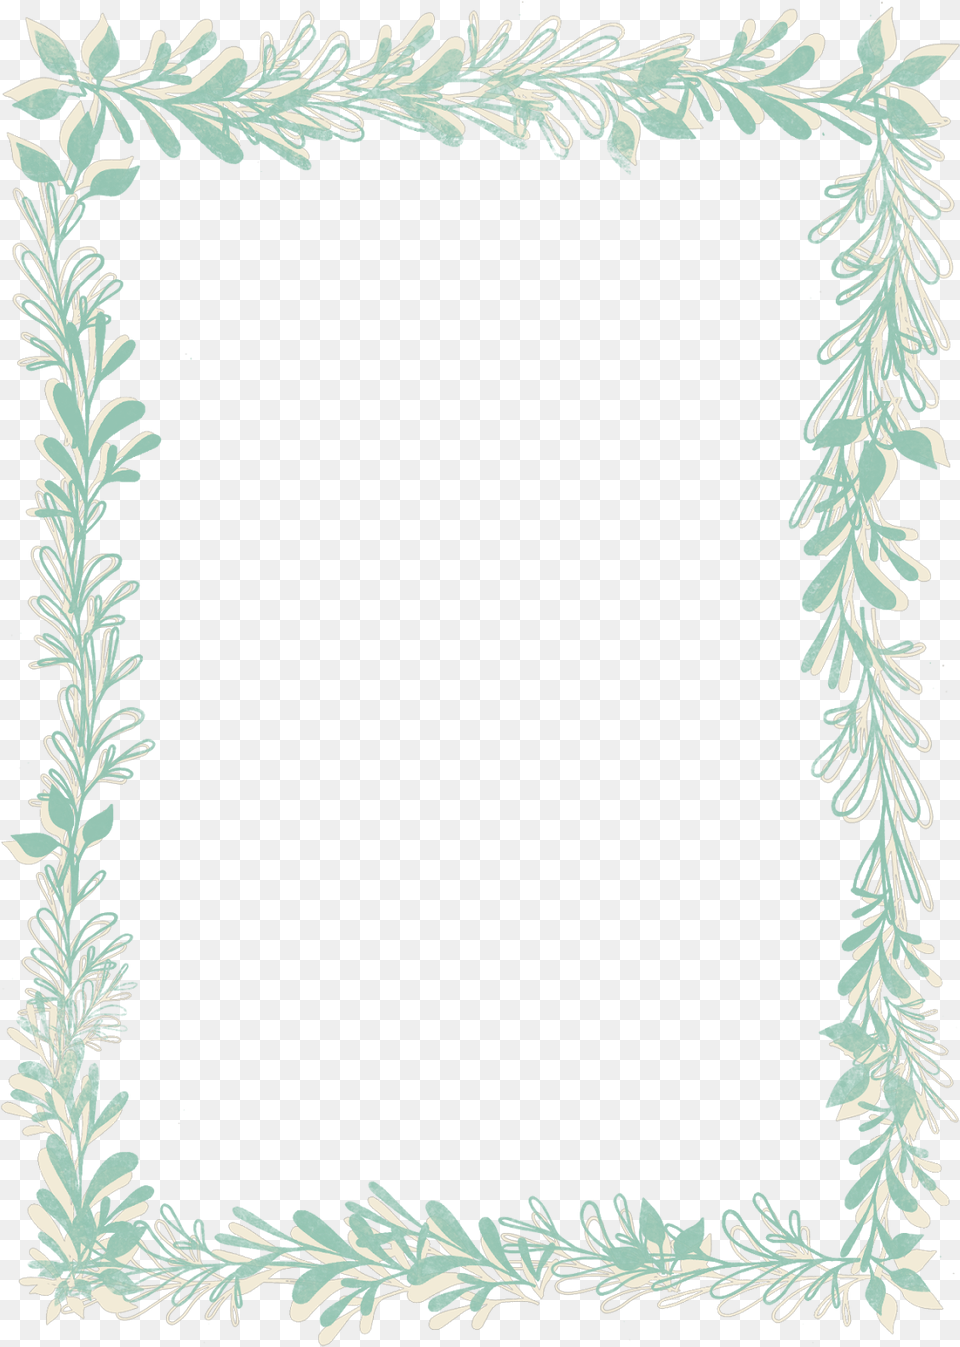 Hd Picture Frames Watercolor Painting Watercolor Leaves Frame, Home Decor, Plant, Art, Floral Design Free Png Download